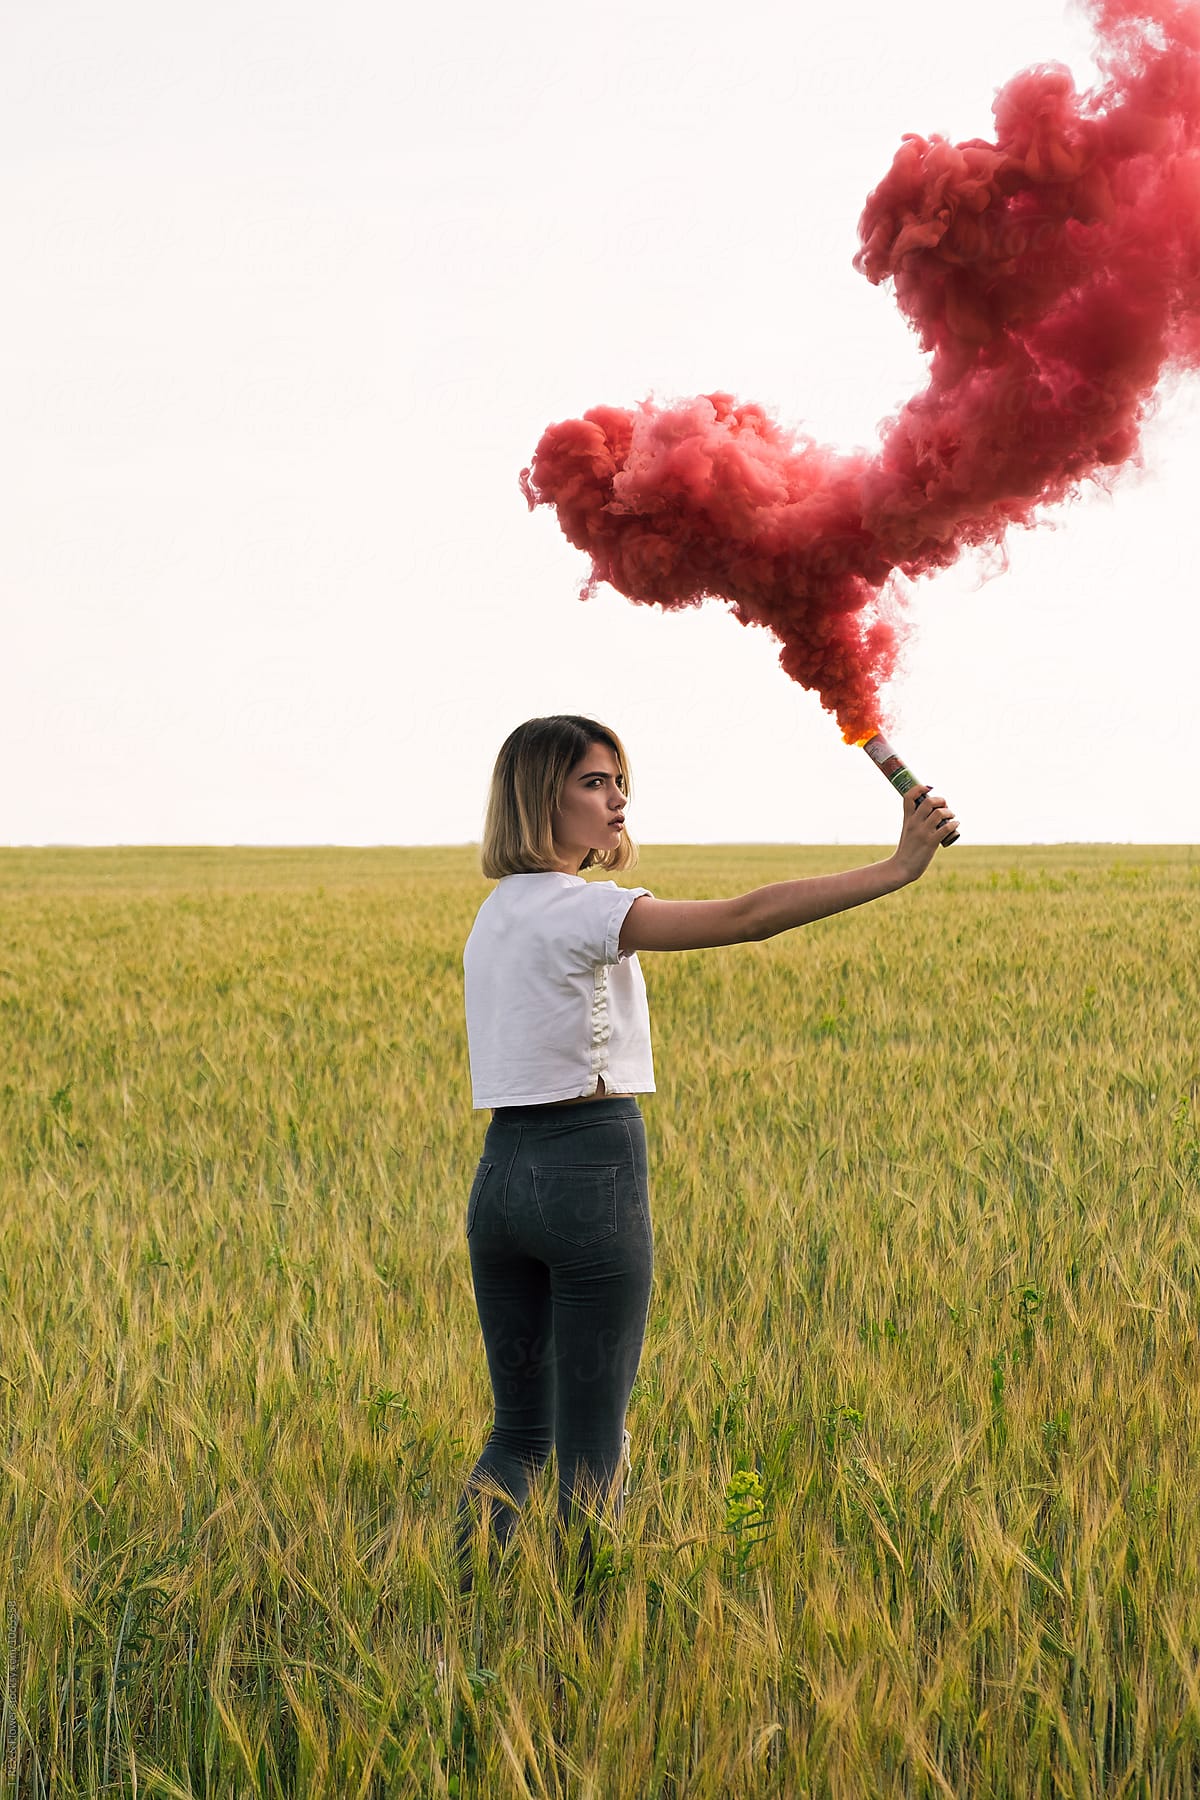 Fil atlet erindringsmønter Serious Teen Girl With Red Smoke Bomb On Meadow" by Stocksy Contributor  "Danil Nevsky" - Stocksy